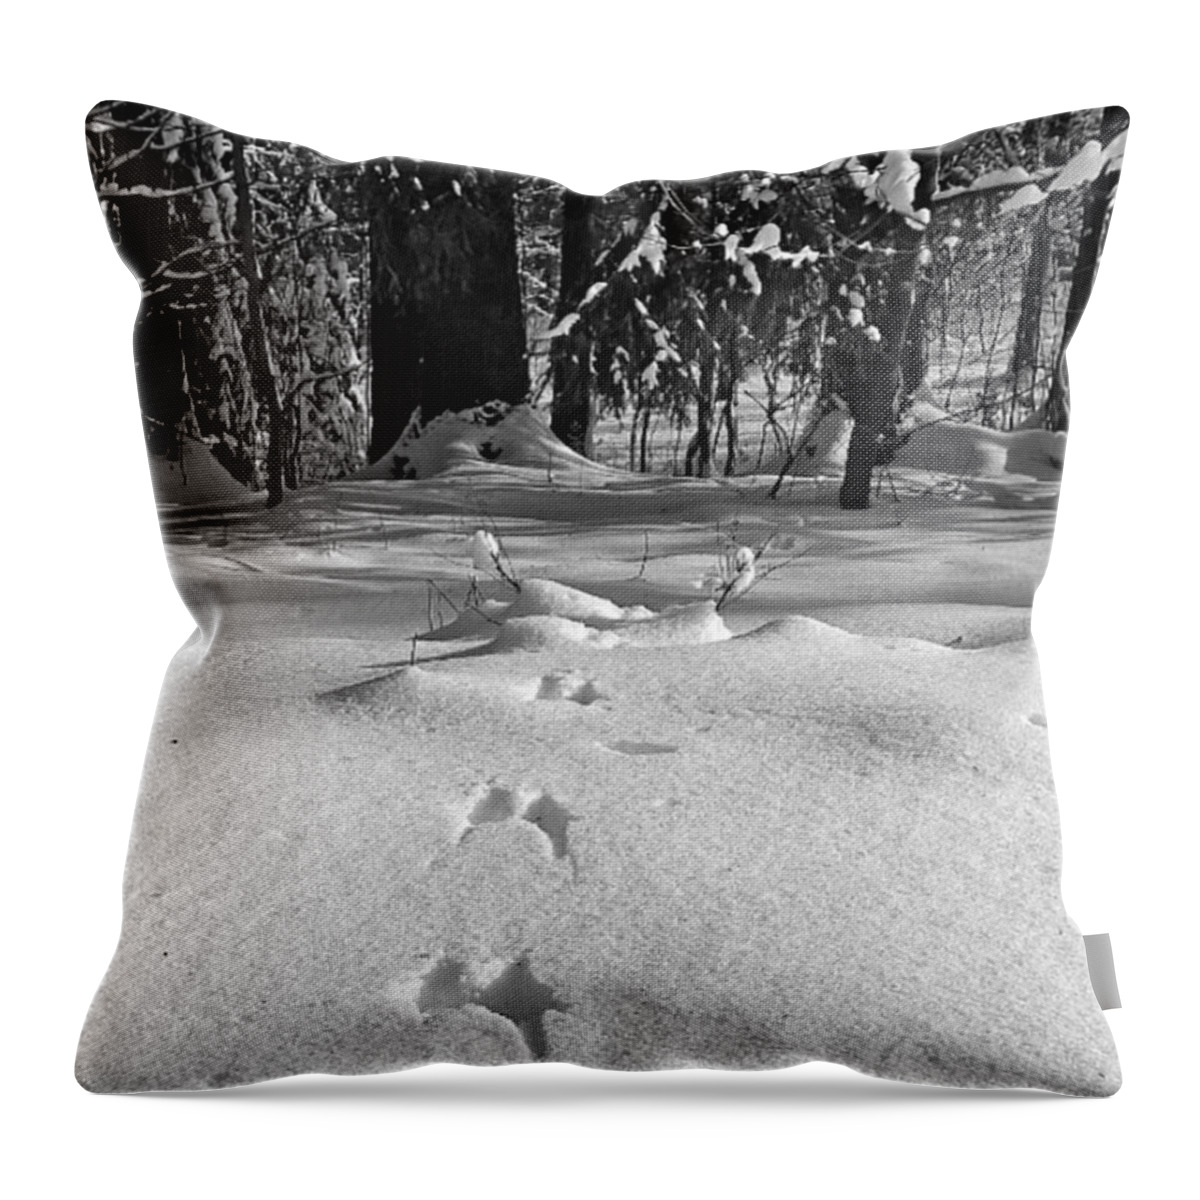 Lumia1520 Throw Pillow featuring the photograph Leaving Traces

#monochrome #bnw by Mandy Tabatt